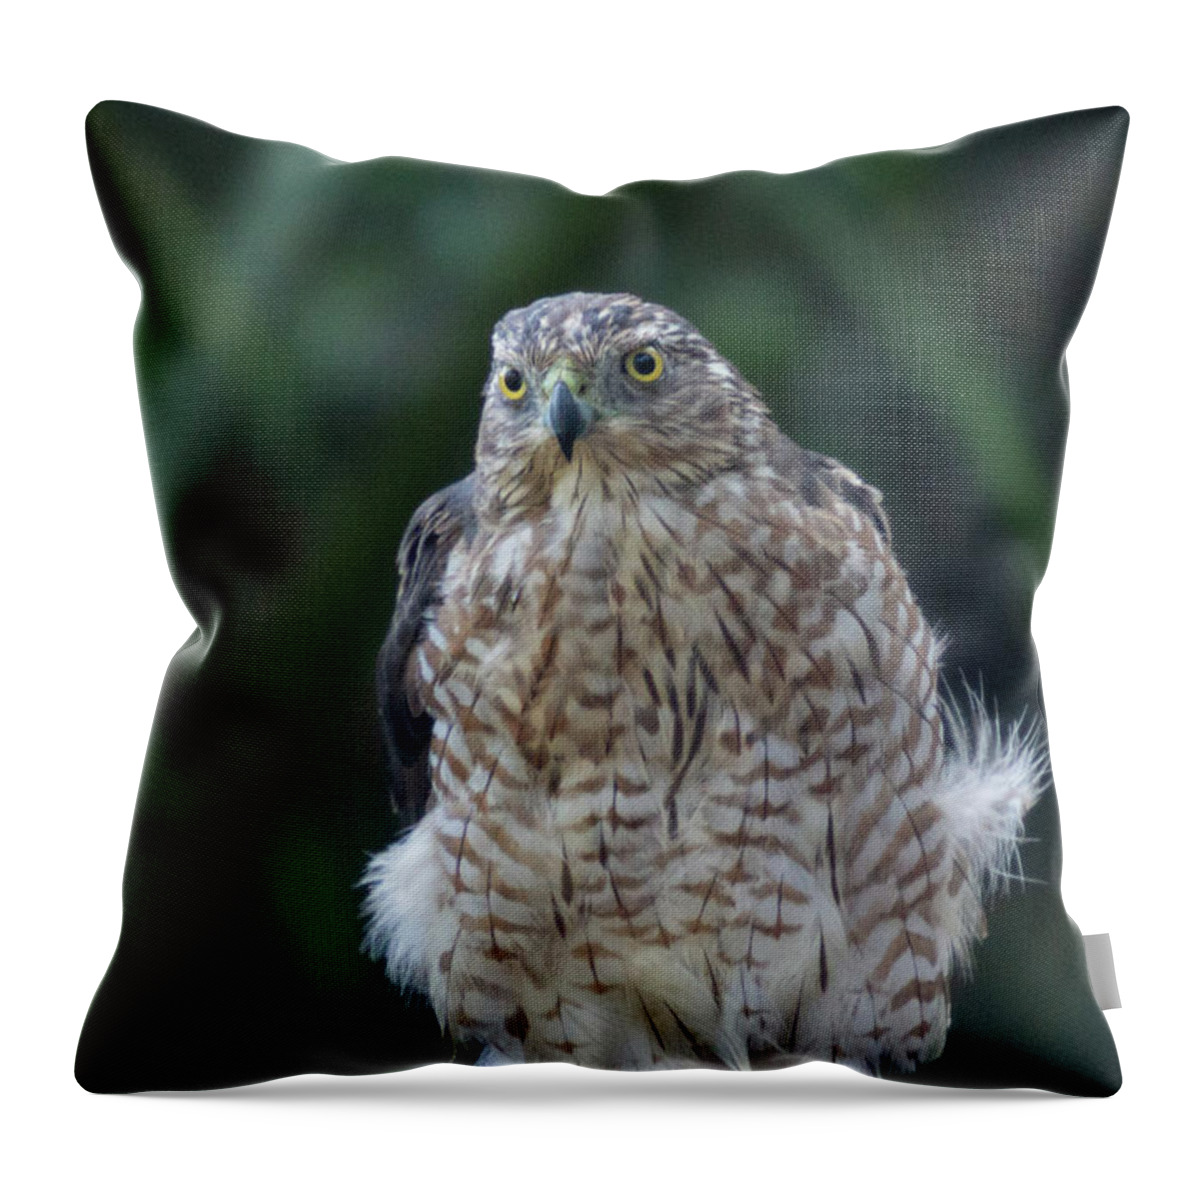 Hawk Throw Pillow featuring the photograph Resting Cooper's Hawk by Patricia Schaefer